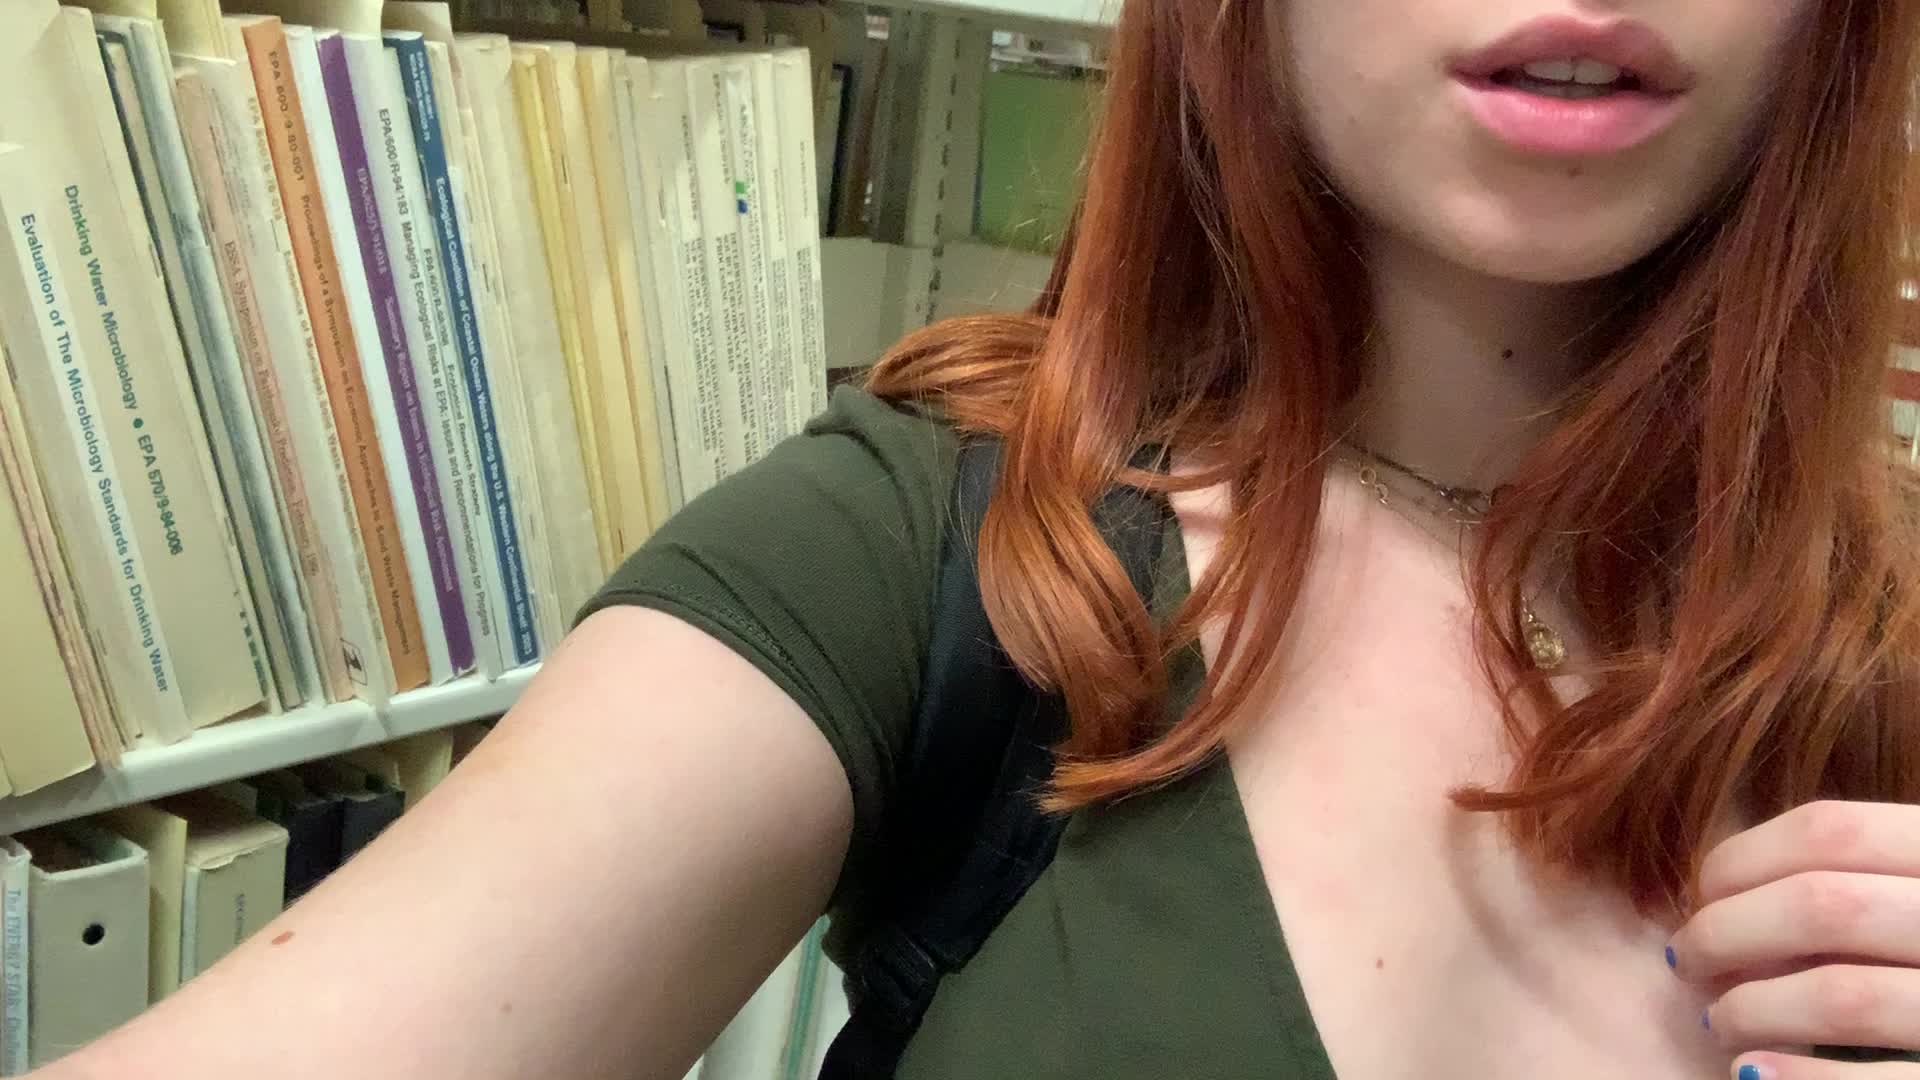 one sentence to describe me: 5’1' redhead with an affinity for showing off her tits in libraries